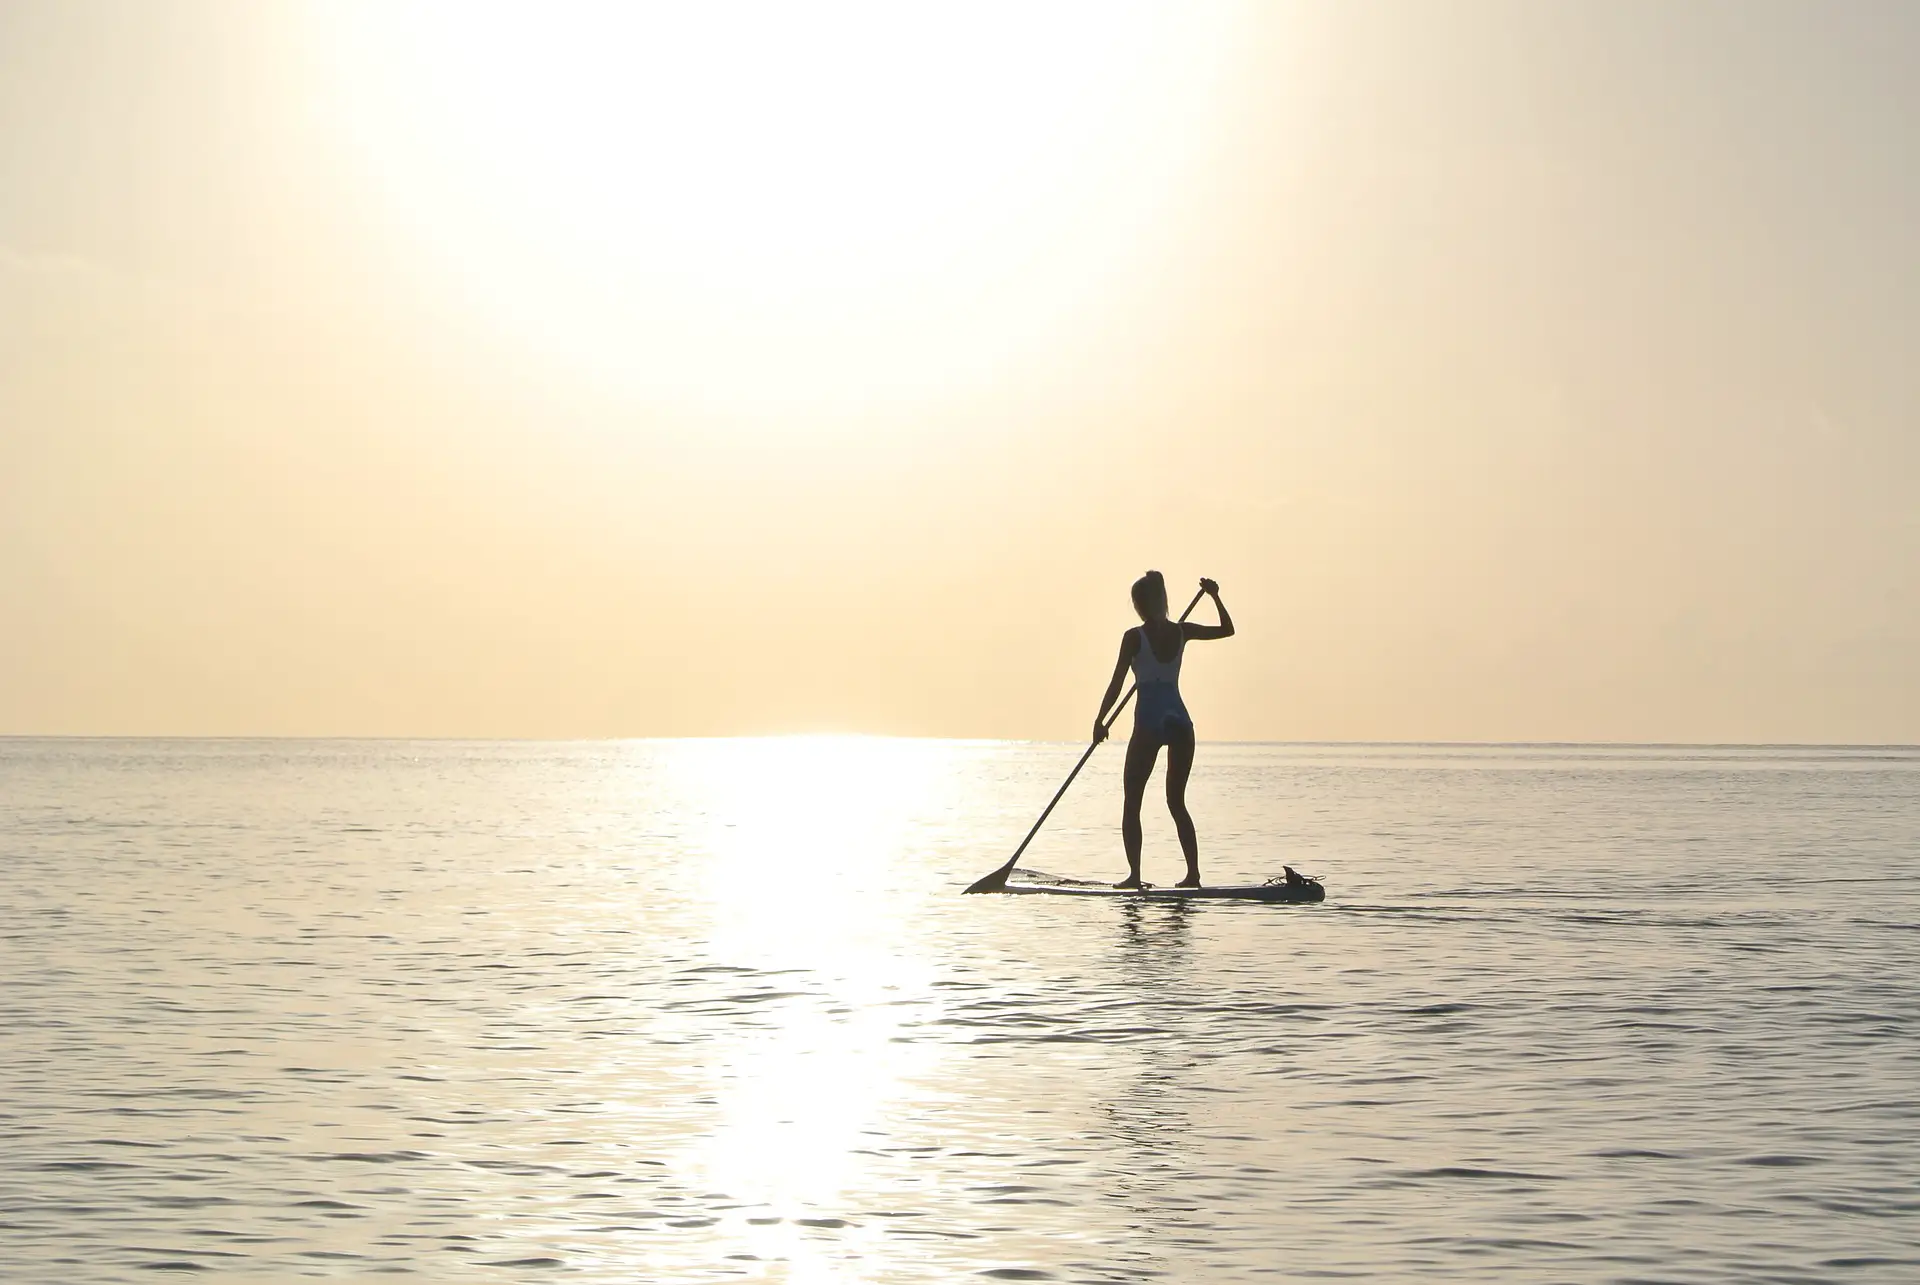 A person enjoys paddleboarding during the sunrise